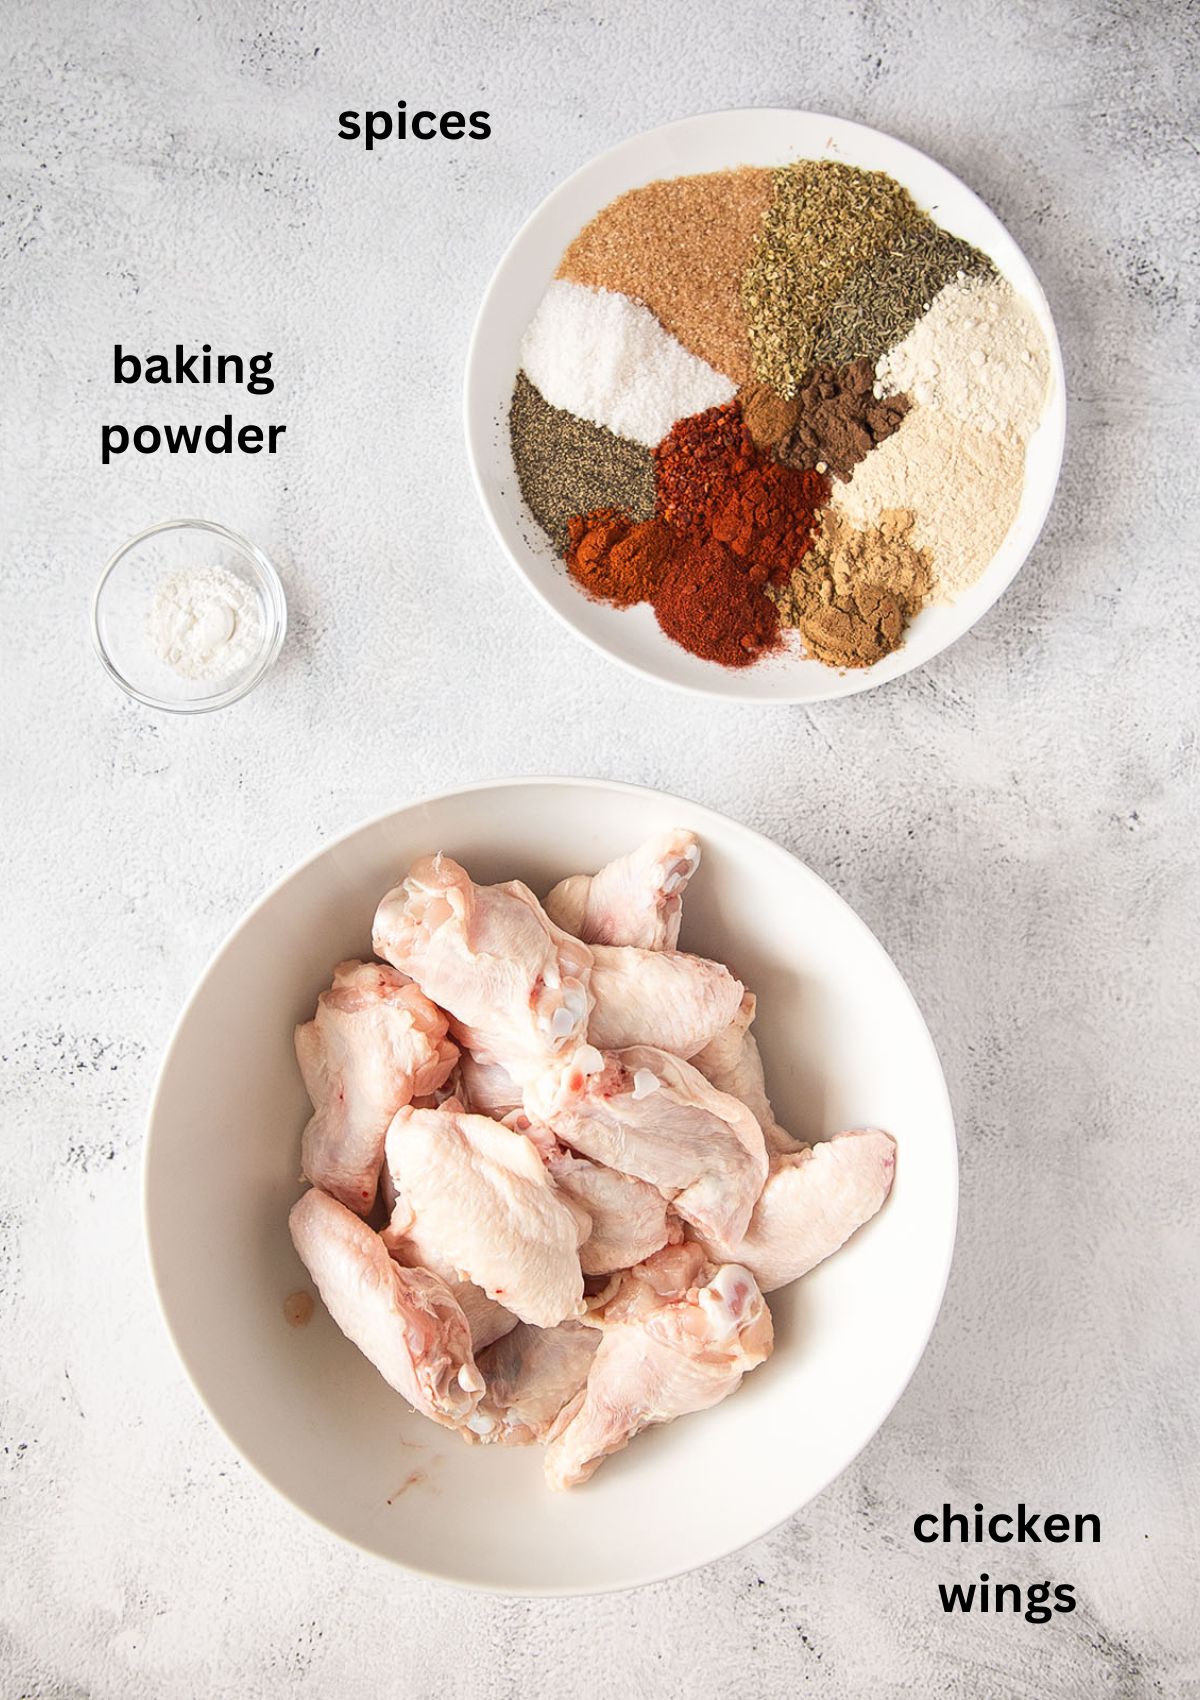 bowls with raw chicken wings, baking powder and spices.